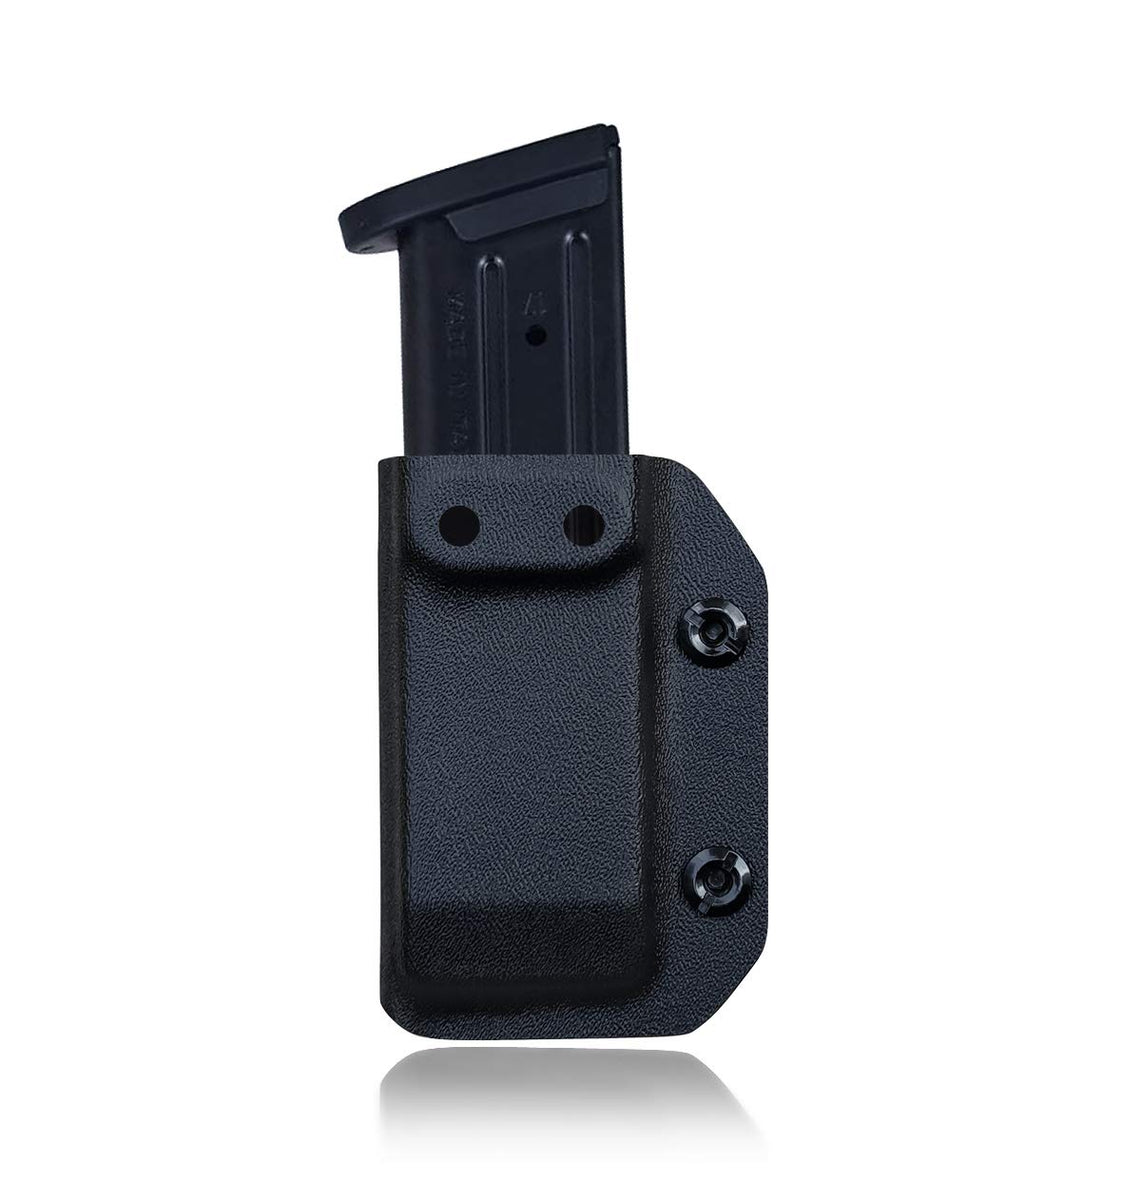 Gen 2 Leather Magazine Holder for 9mm or .40 Magazines Fits Sig P239 Mags 